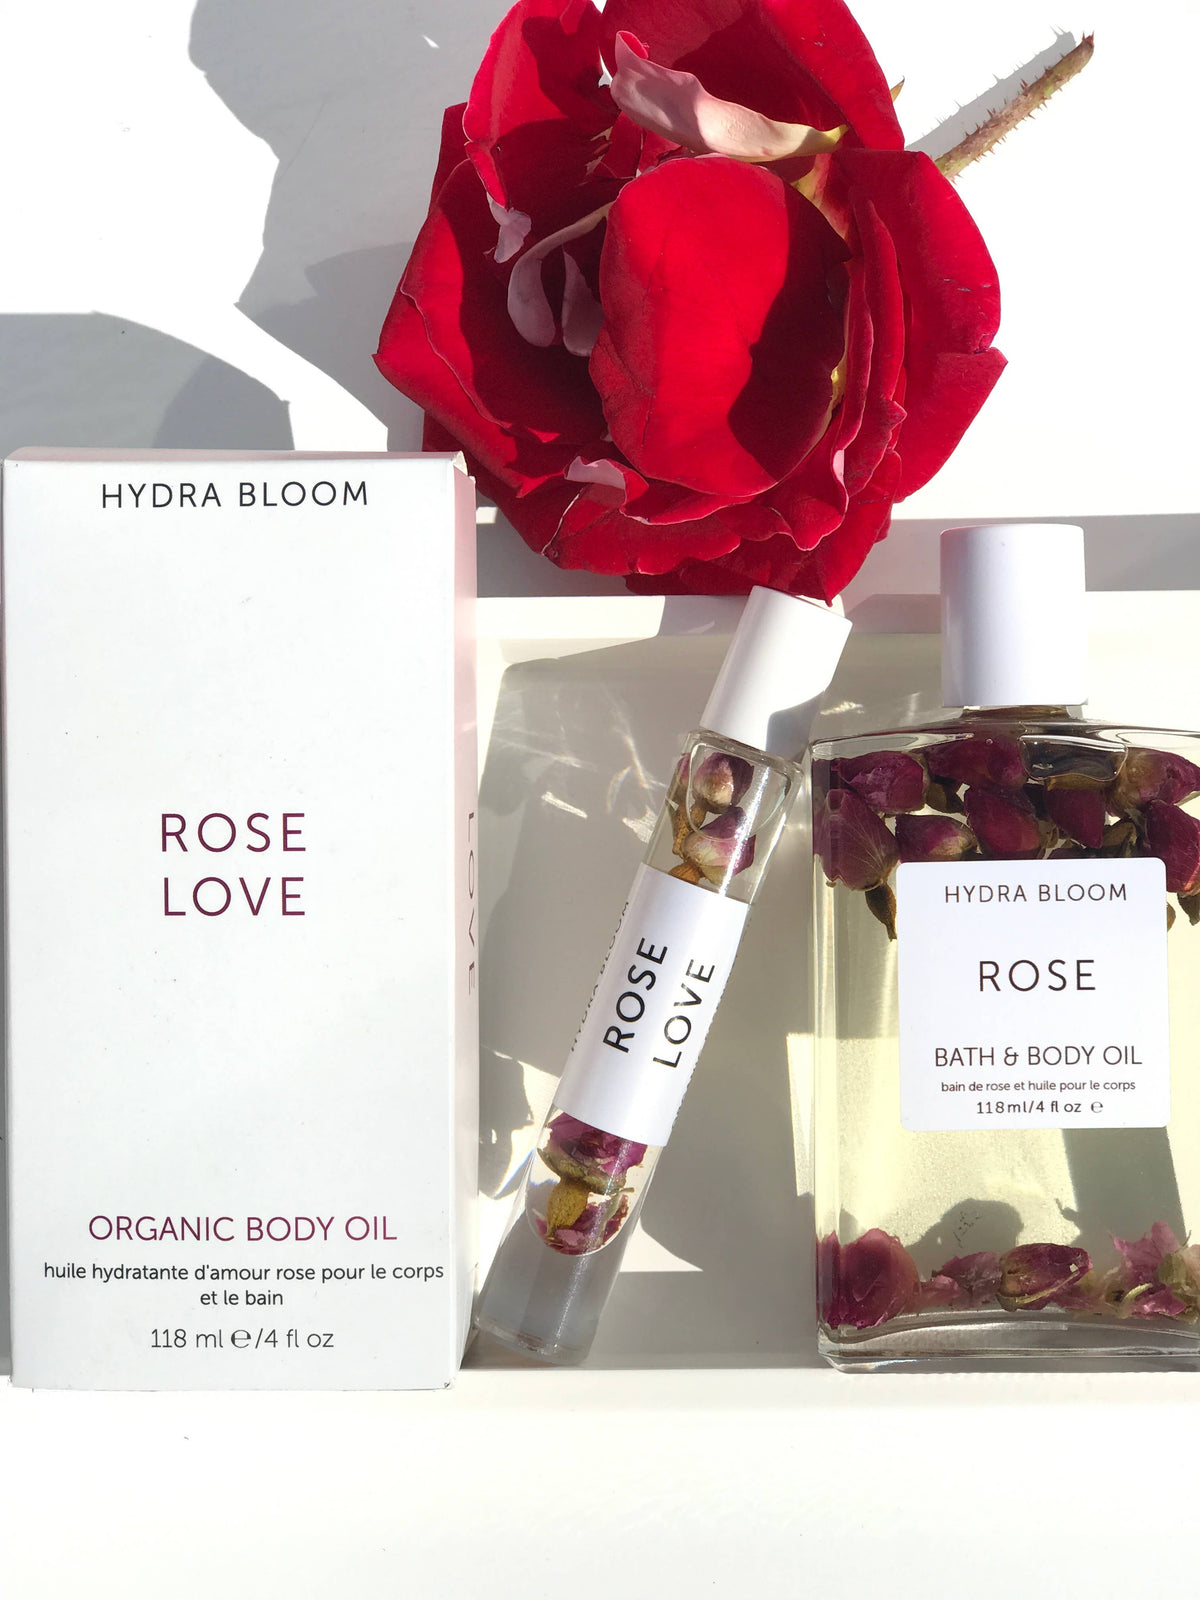 An arrangement featuring a red rose, a bottle and a smaller roll-on bottle of Hydra Bloom Beauty Rose Love Bath and Body Oil, and a white box labeled accordingly, all placed on a white